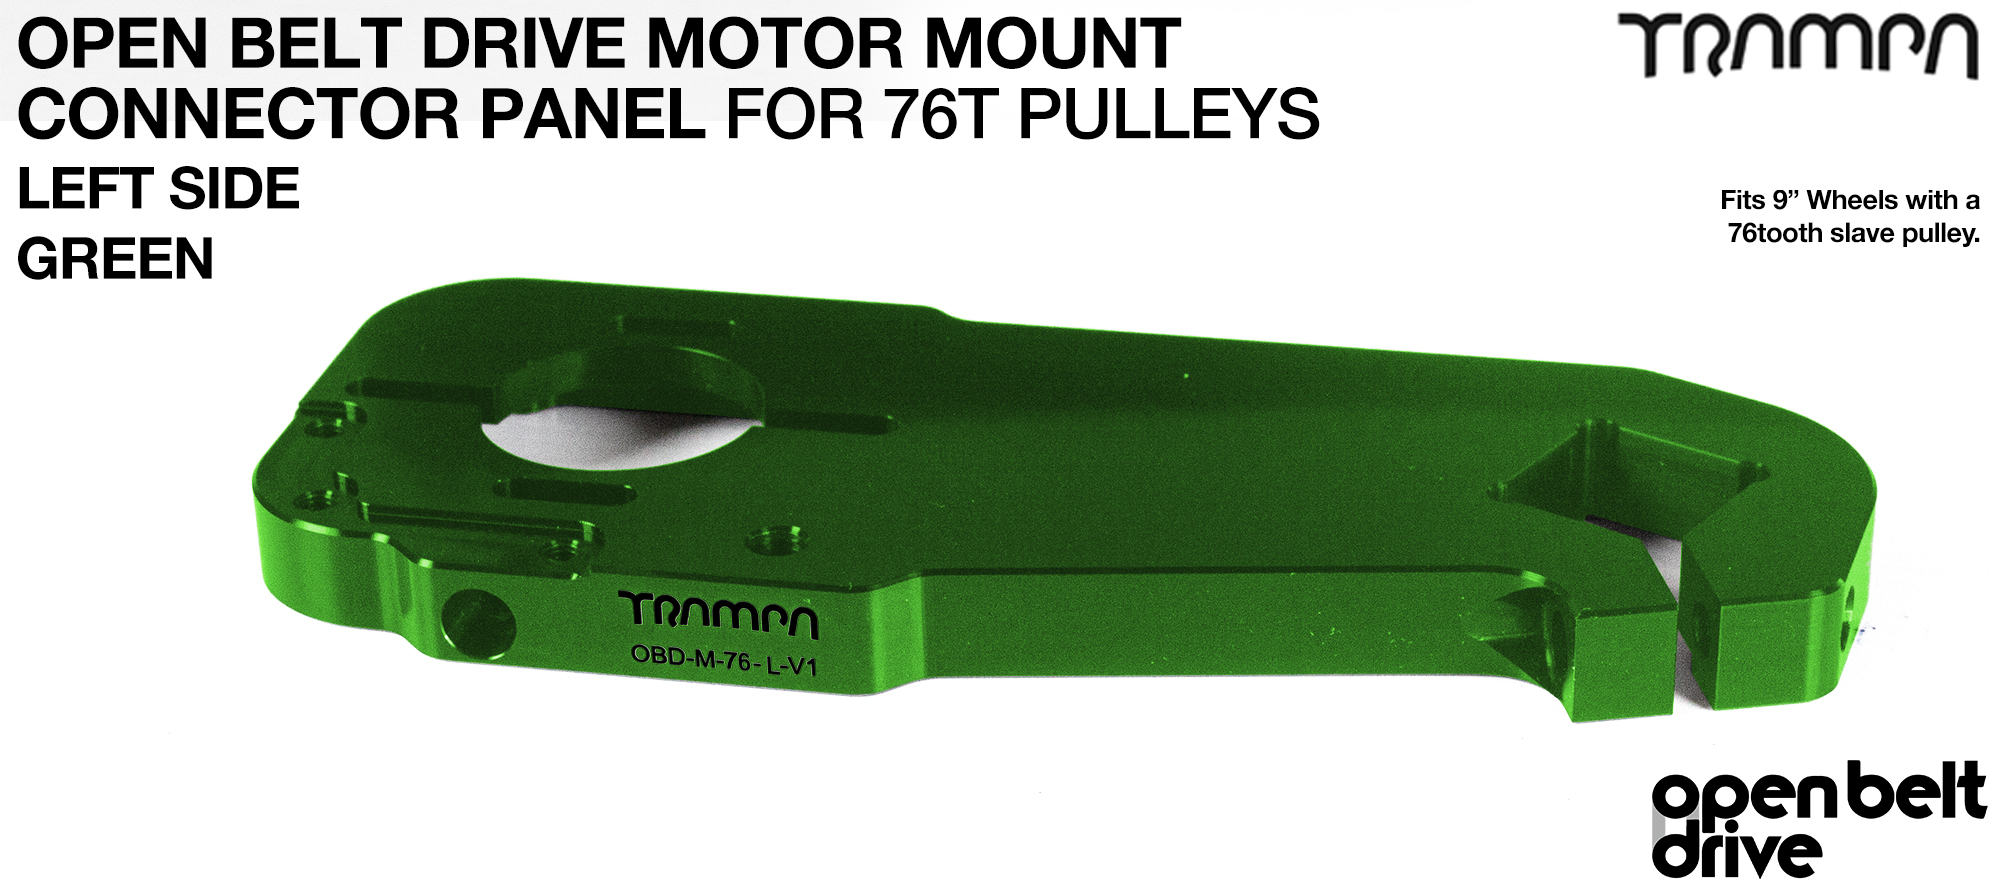 OBD Motor Mount Connector Panel for 76 tooth pulleys - REGULAR - GREEN